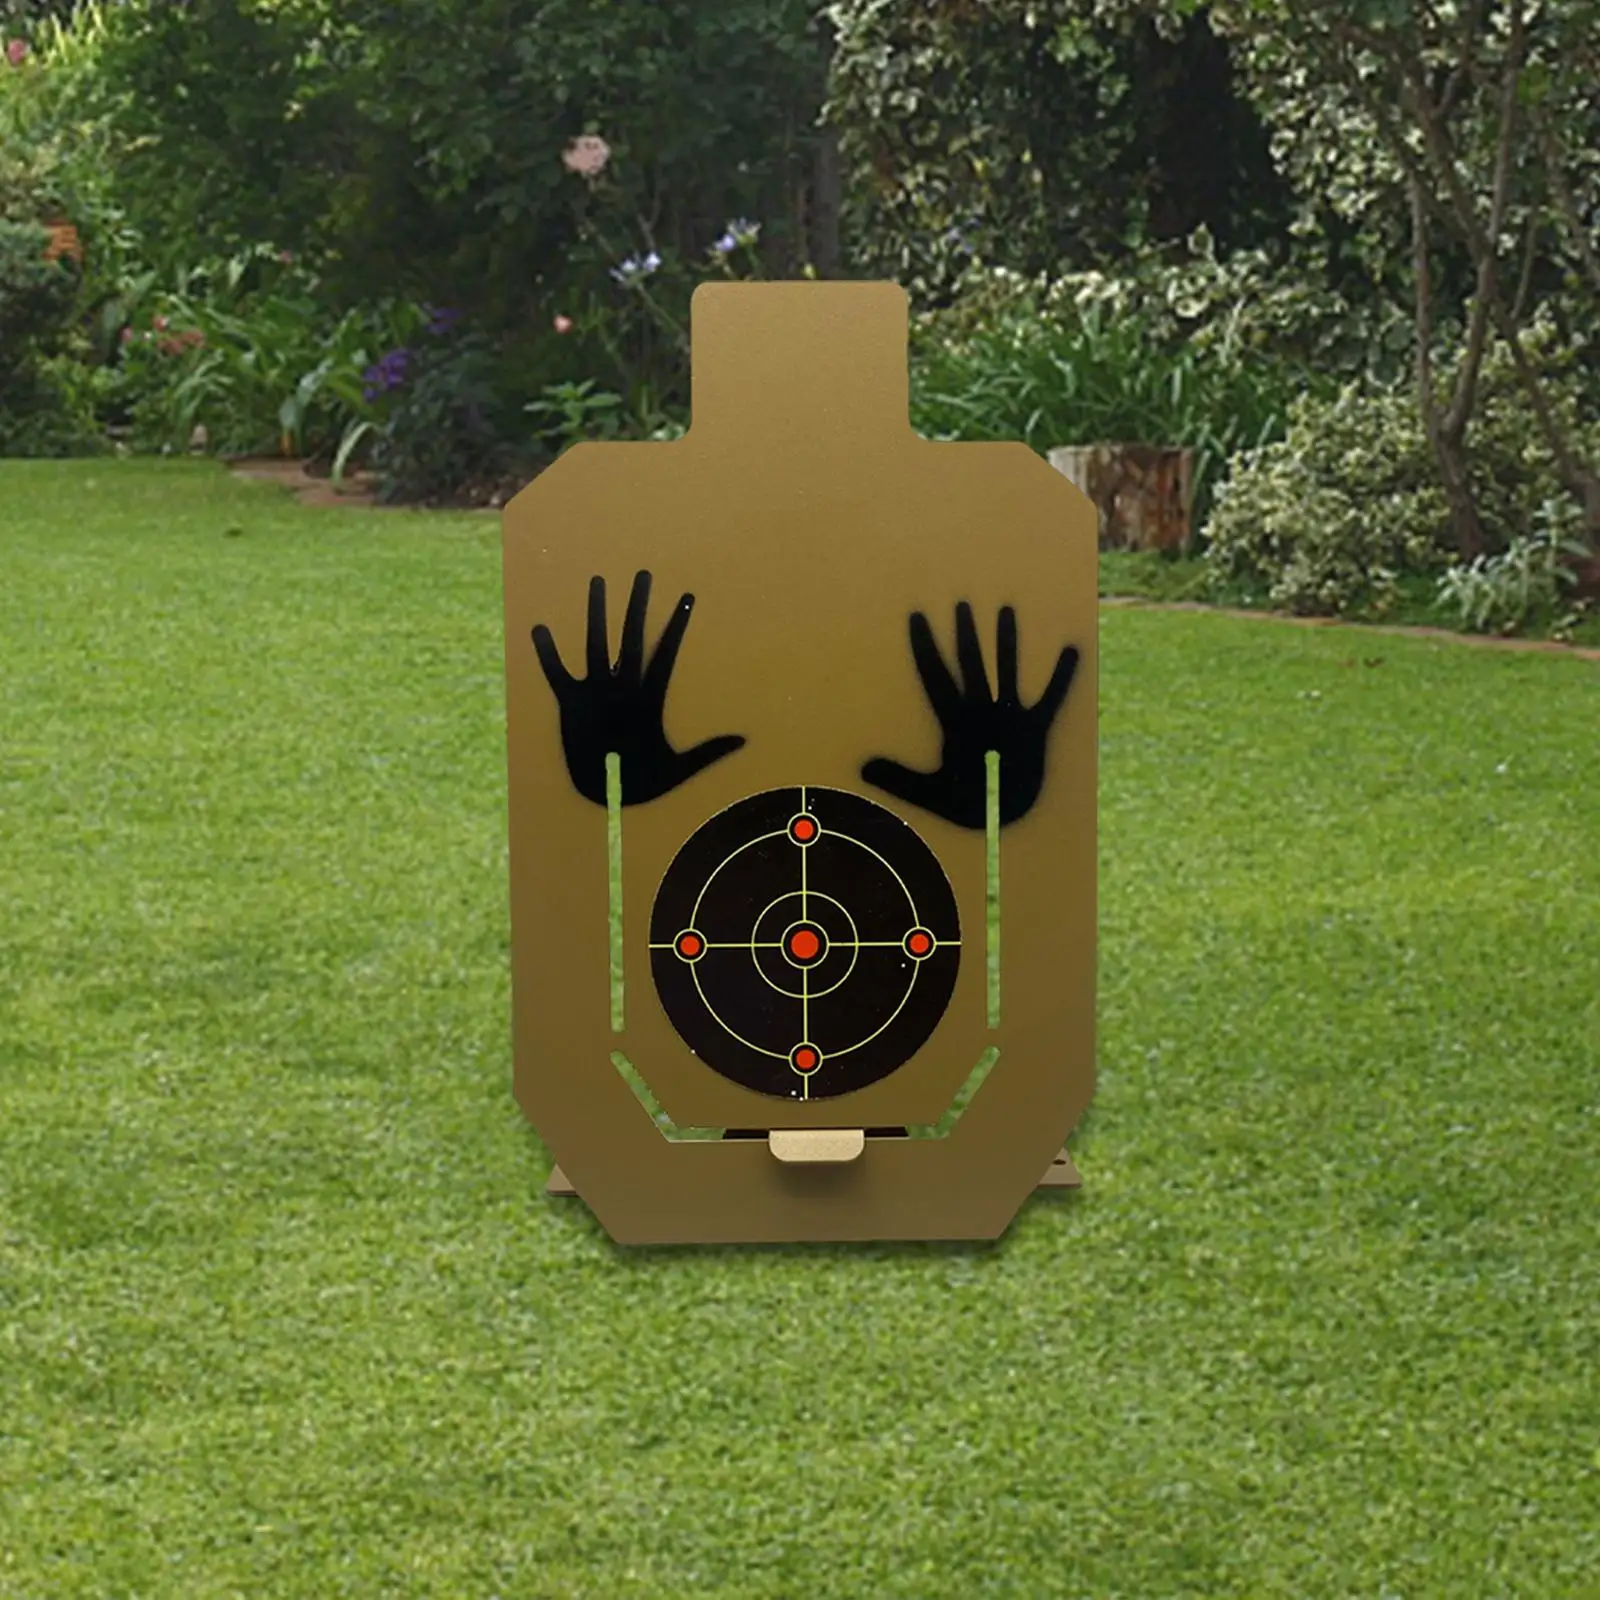 

Carbon Steel Silhouette Target Shooting Hunting Catapult Professionals Shoot Practice Archery Aim for Training Practice Outdoor